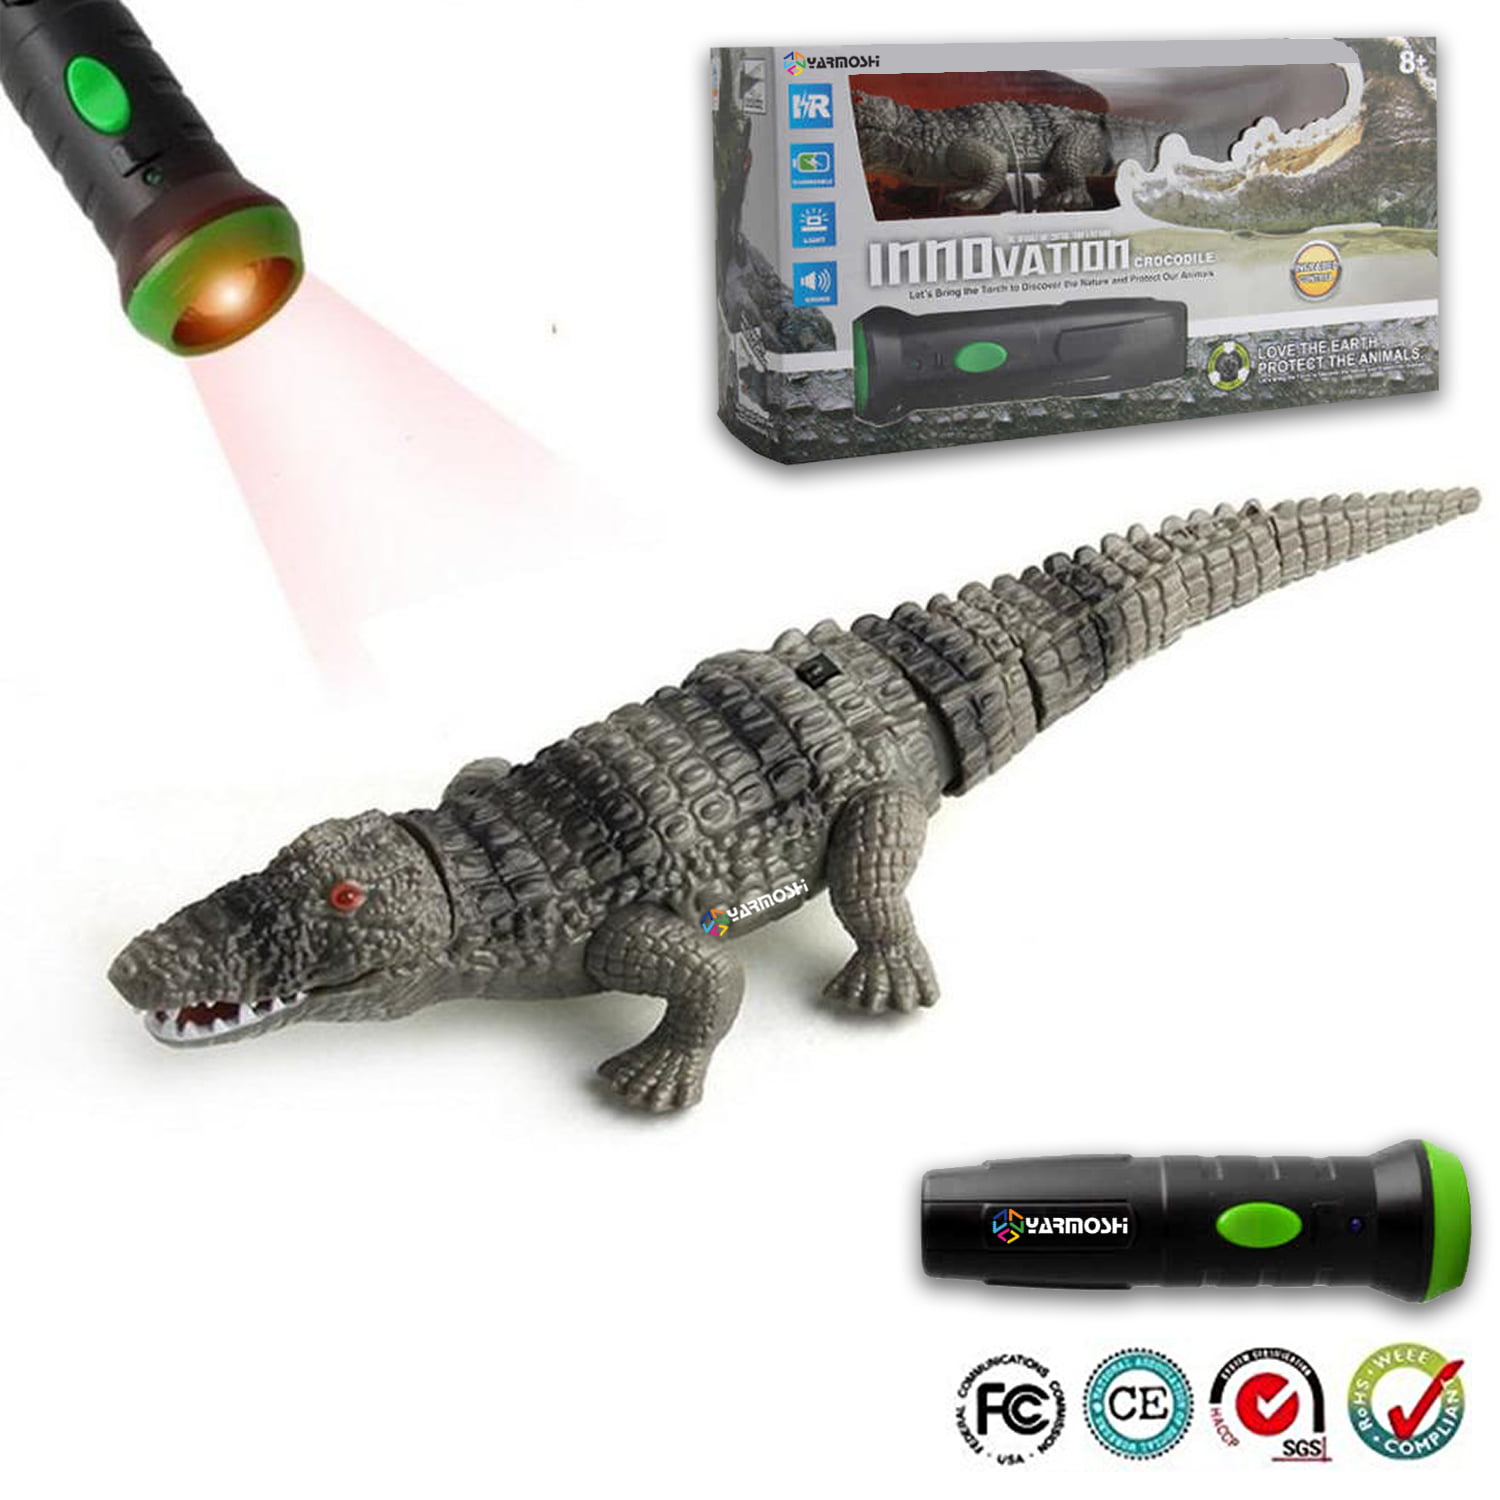 Prank Crocodile RC Animal Toy Looks Real Feels Real Roars And Moves Like A Real Crocodile Its An Toy for Boys And Girls XIAOKEKE Remote Control Crocodile 